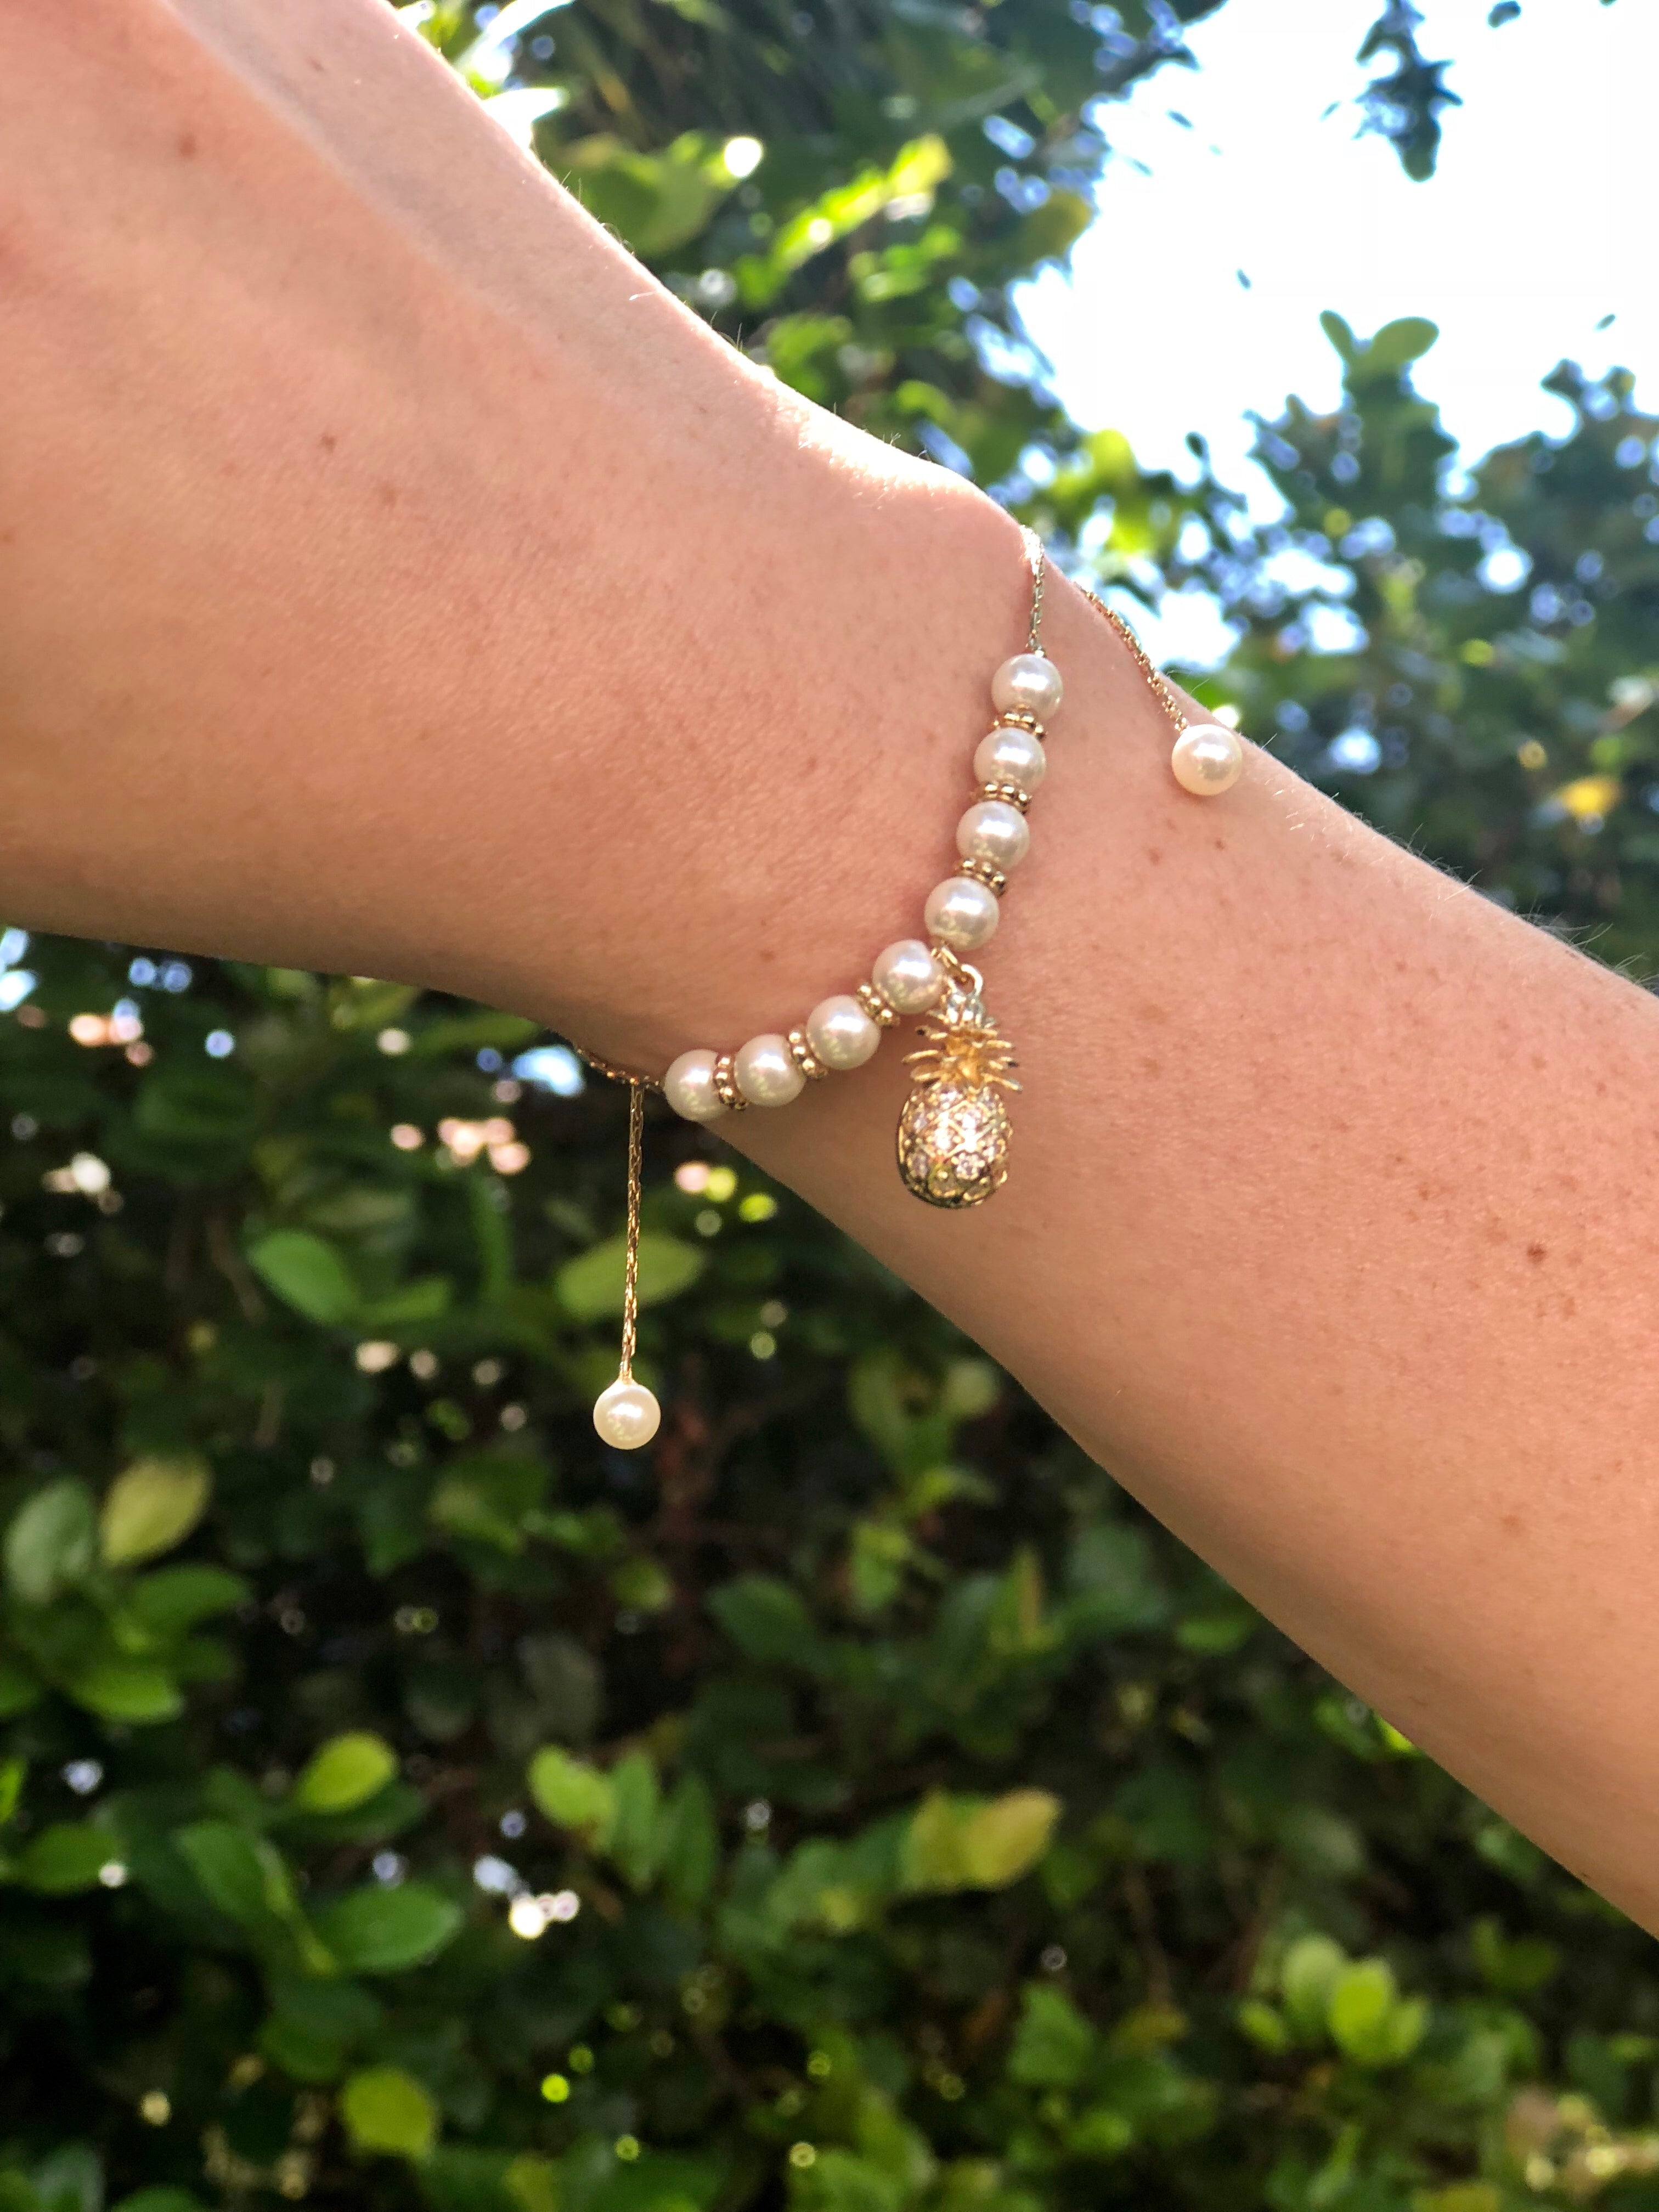 Pineapple and Pearl charm bracelet